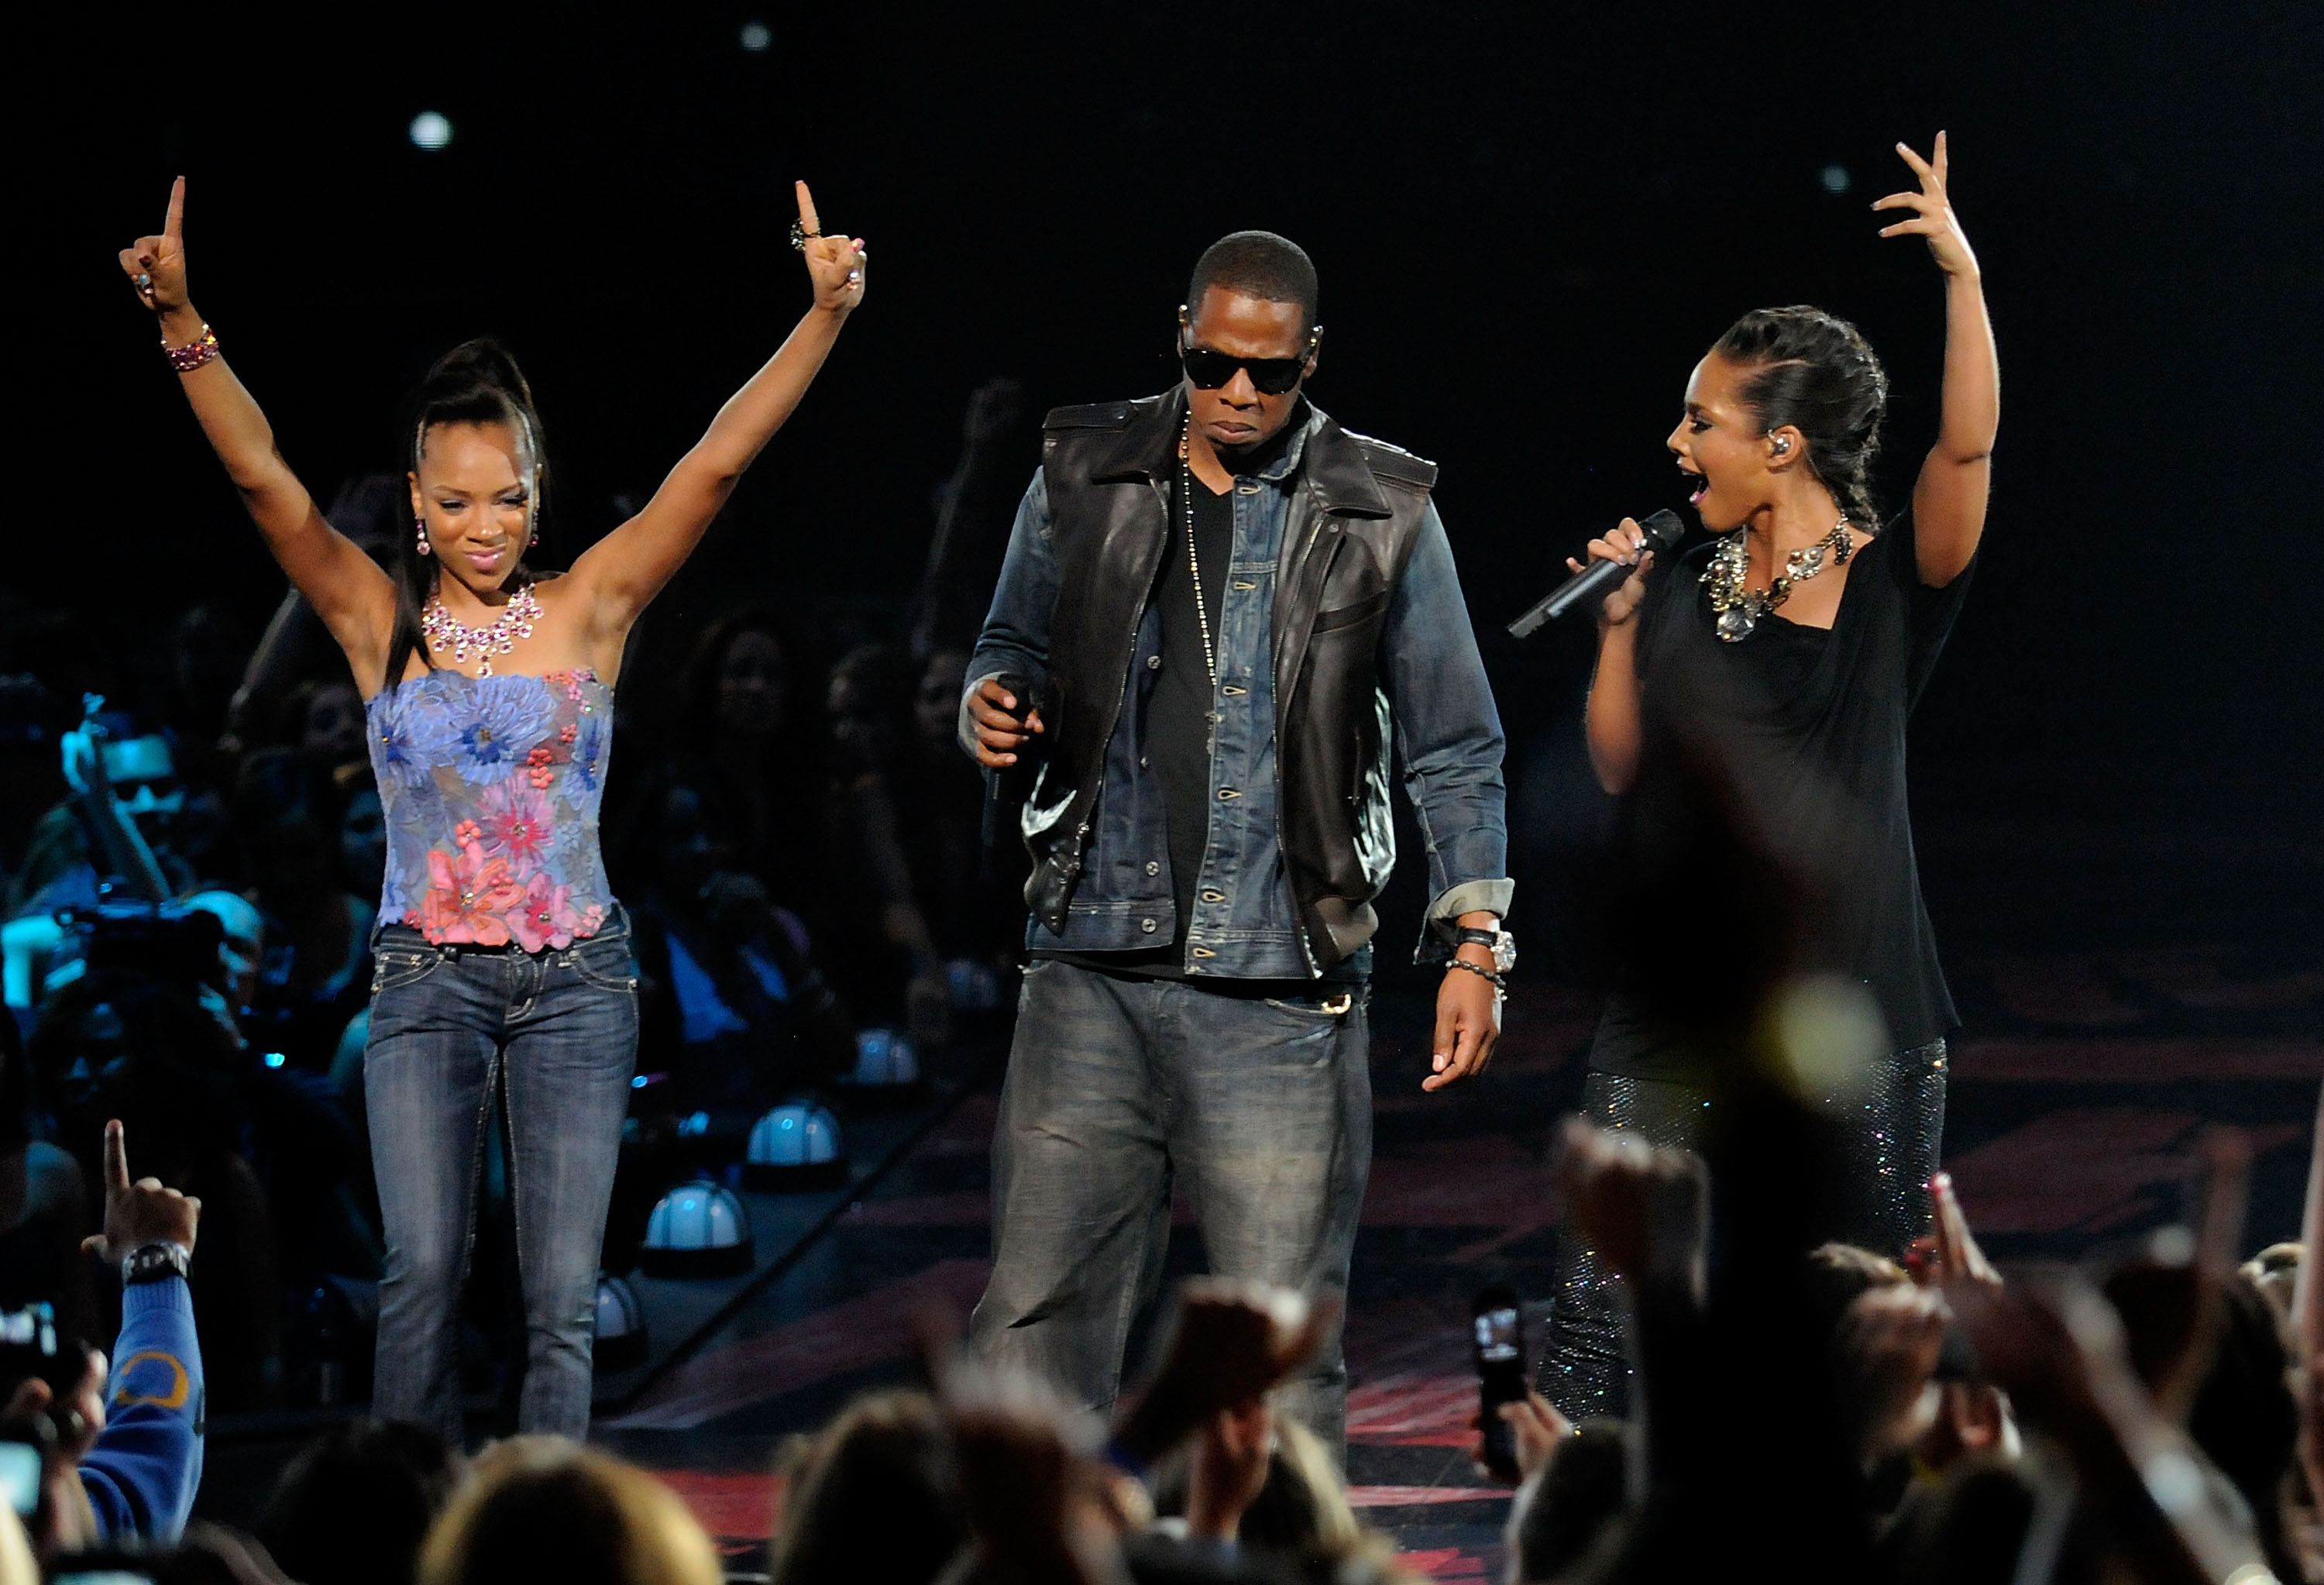 Lil Mama, Jay-Z, and Alicia Keys on stage